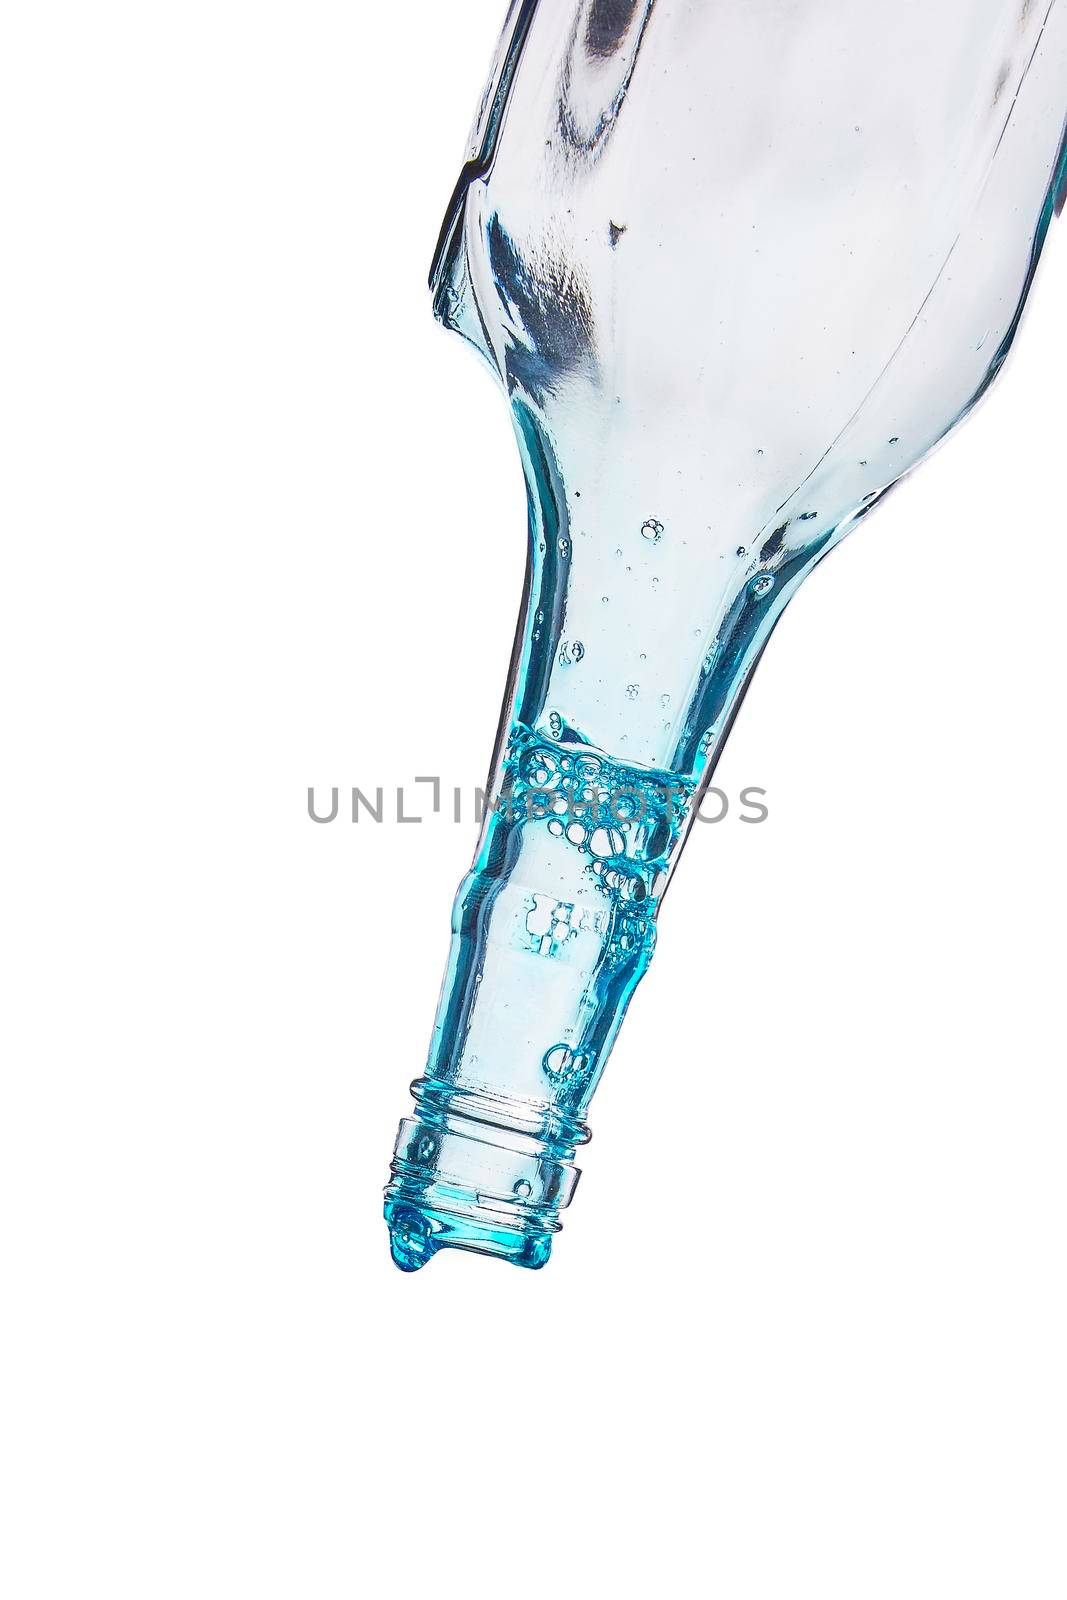  One glass bottle clear empty on white background